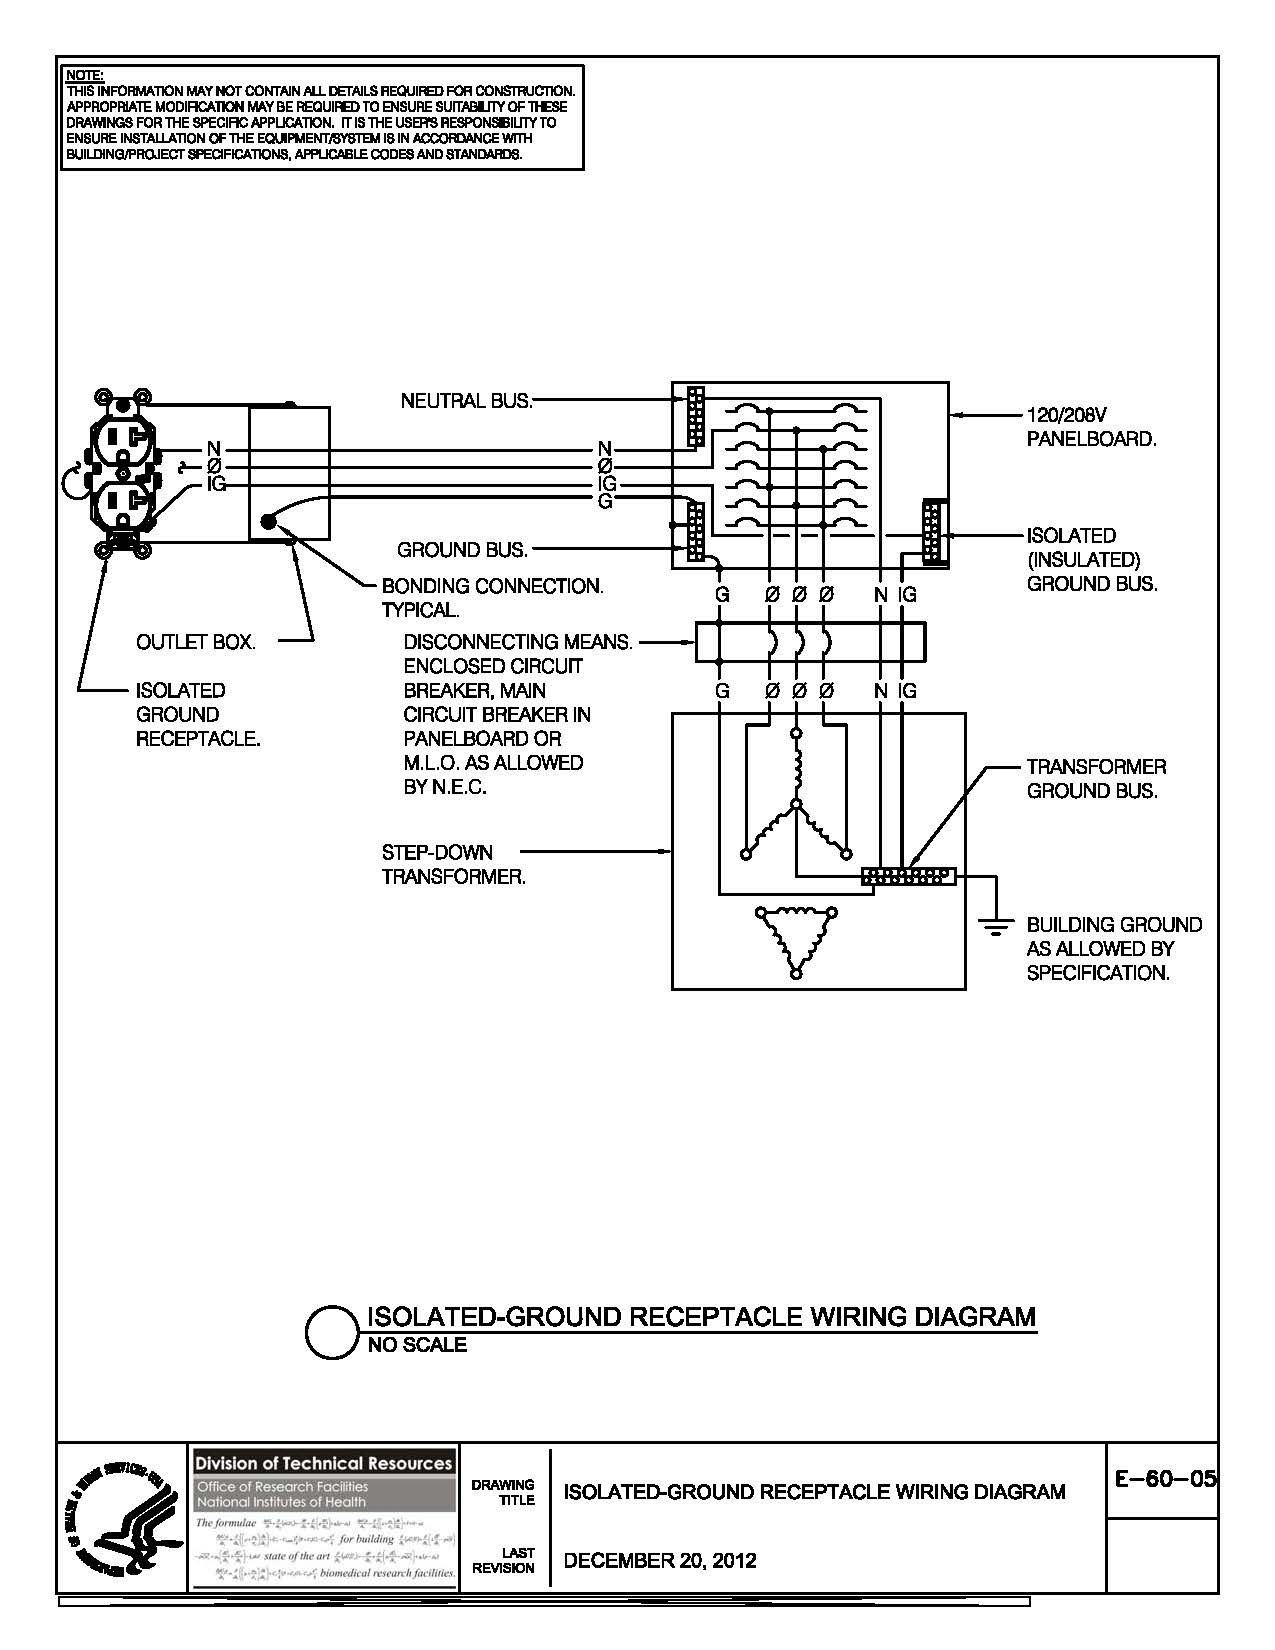 Wiring Diagram for House Lighting Circuit New Standard Wiring Diagram for A House Of Wiring Diagram for House Lighting Circuit